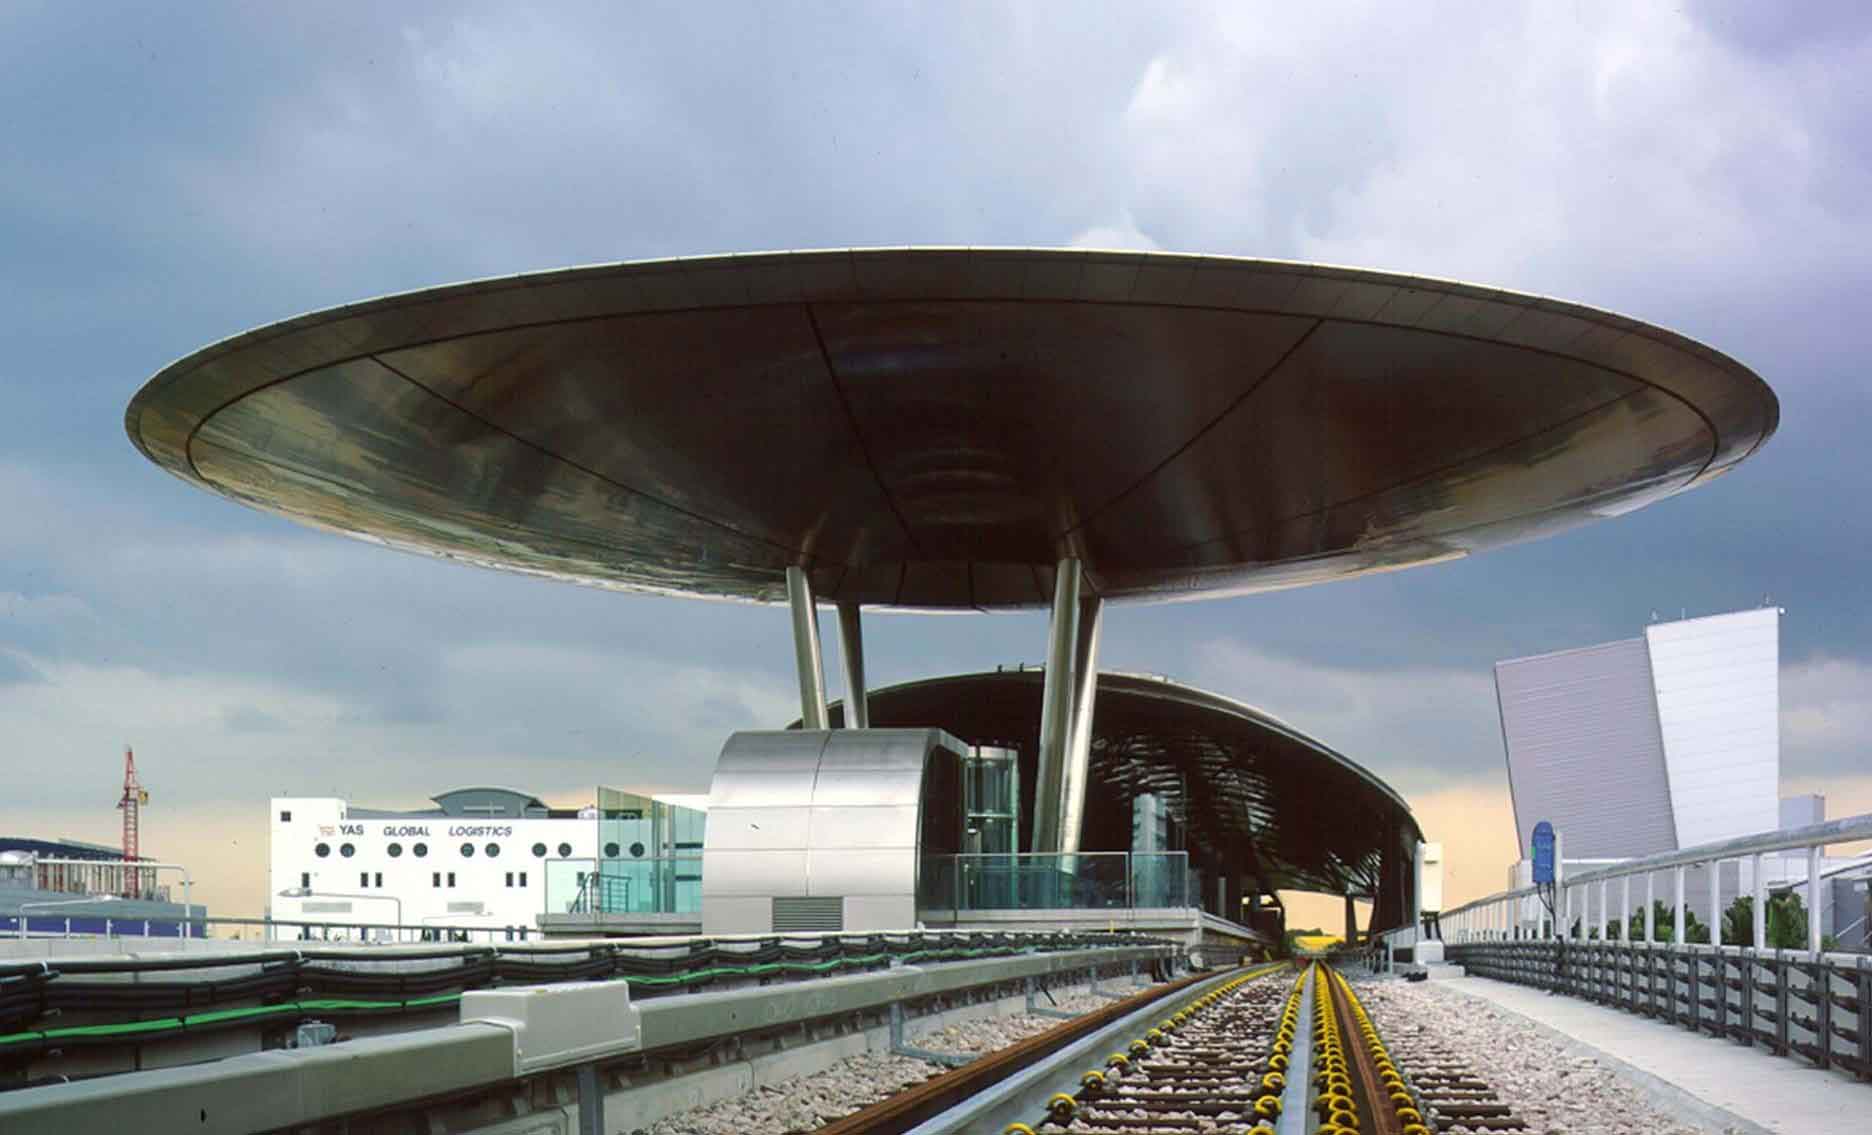 Supported on three tall struts, a disc 40 metres in diameter, sheathed in stainless steel, provides cover for the ticket hall beneath while beyond a blade-like carapace, sheathed in titanium, folds over the platforms.